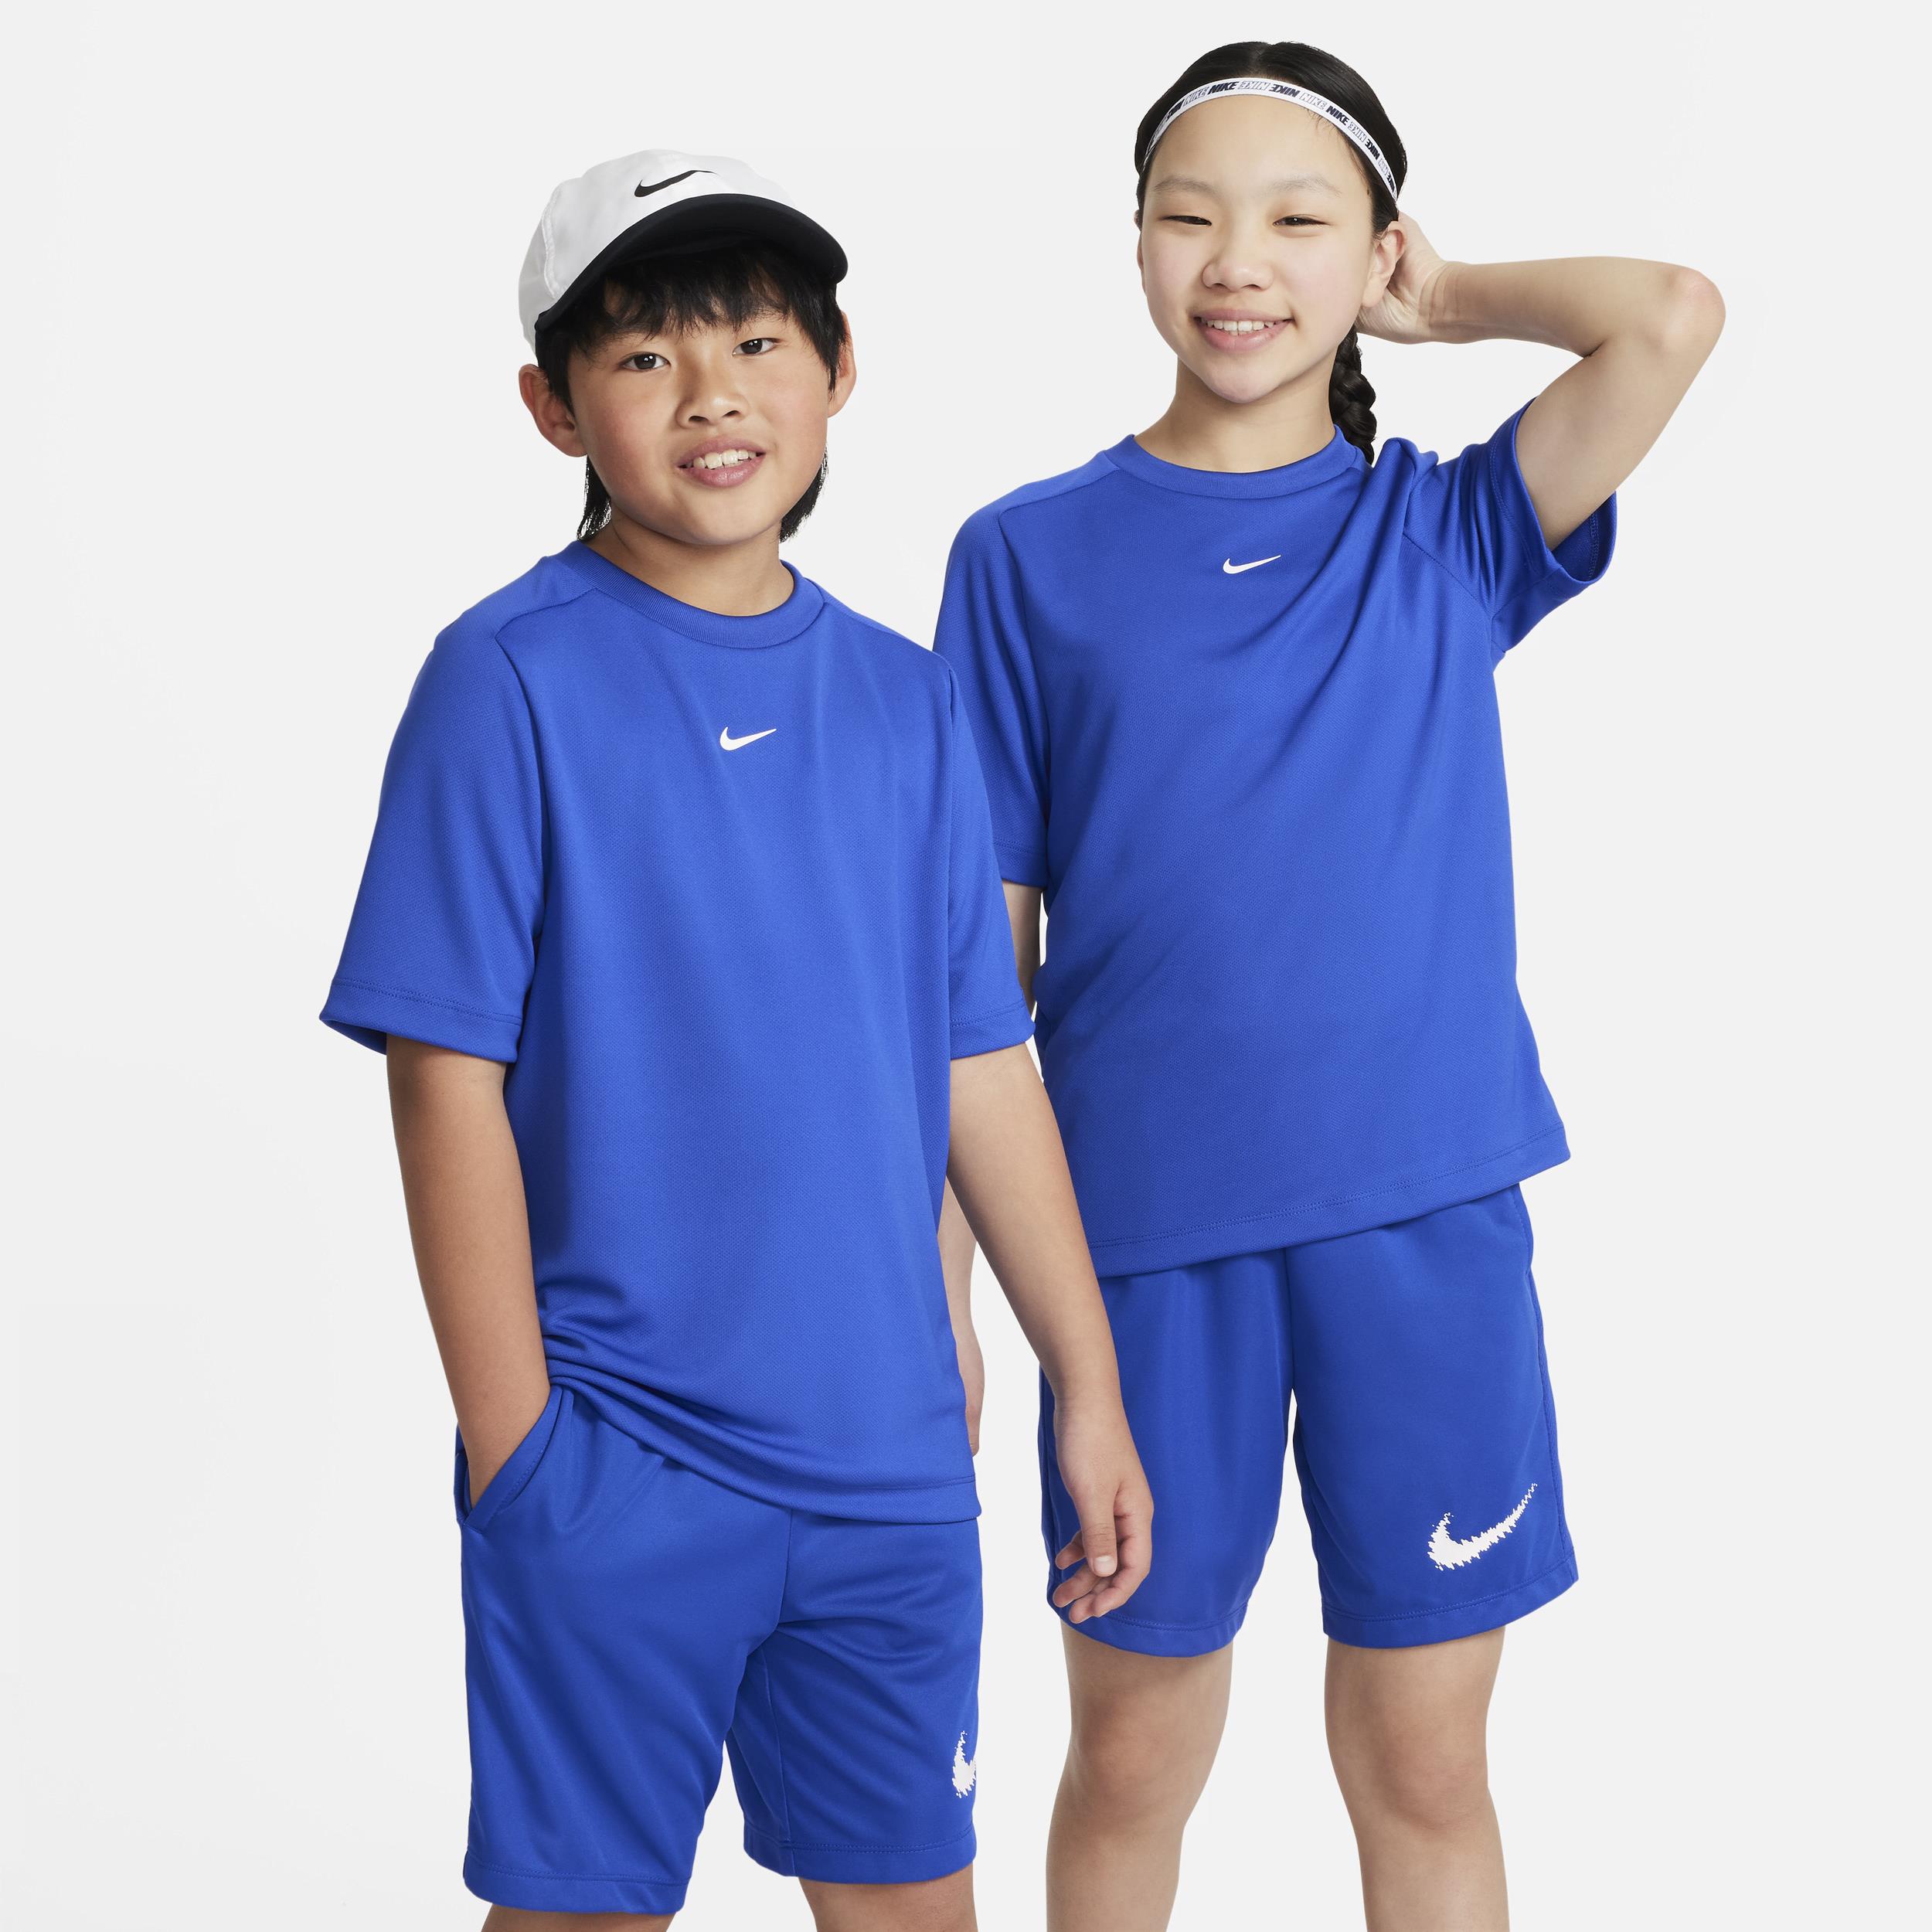 Nike Multi Older Kids' (Boys') Dri-FIT Training Top - Blue - 50% Recycled Polyester